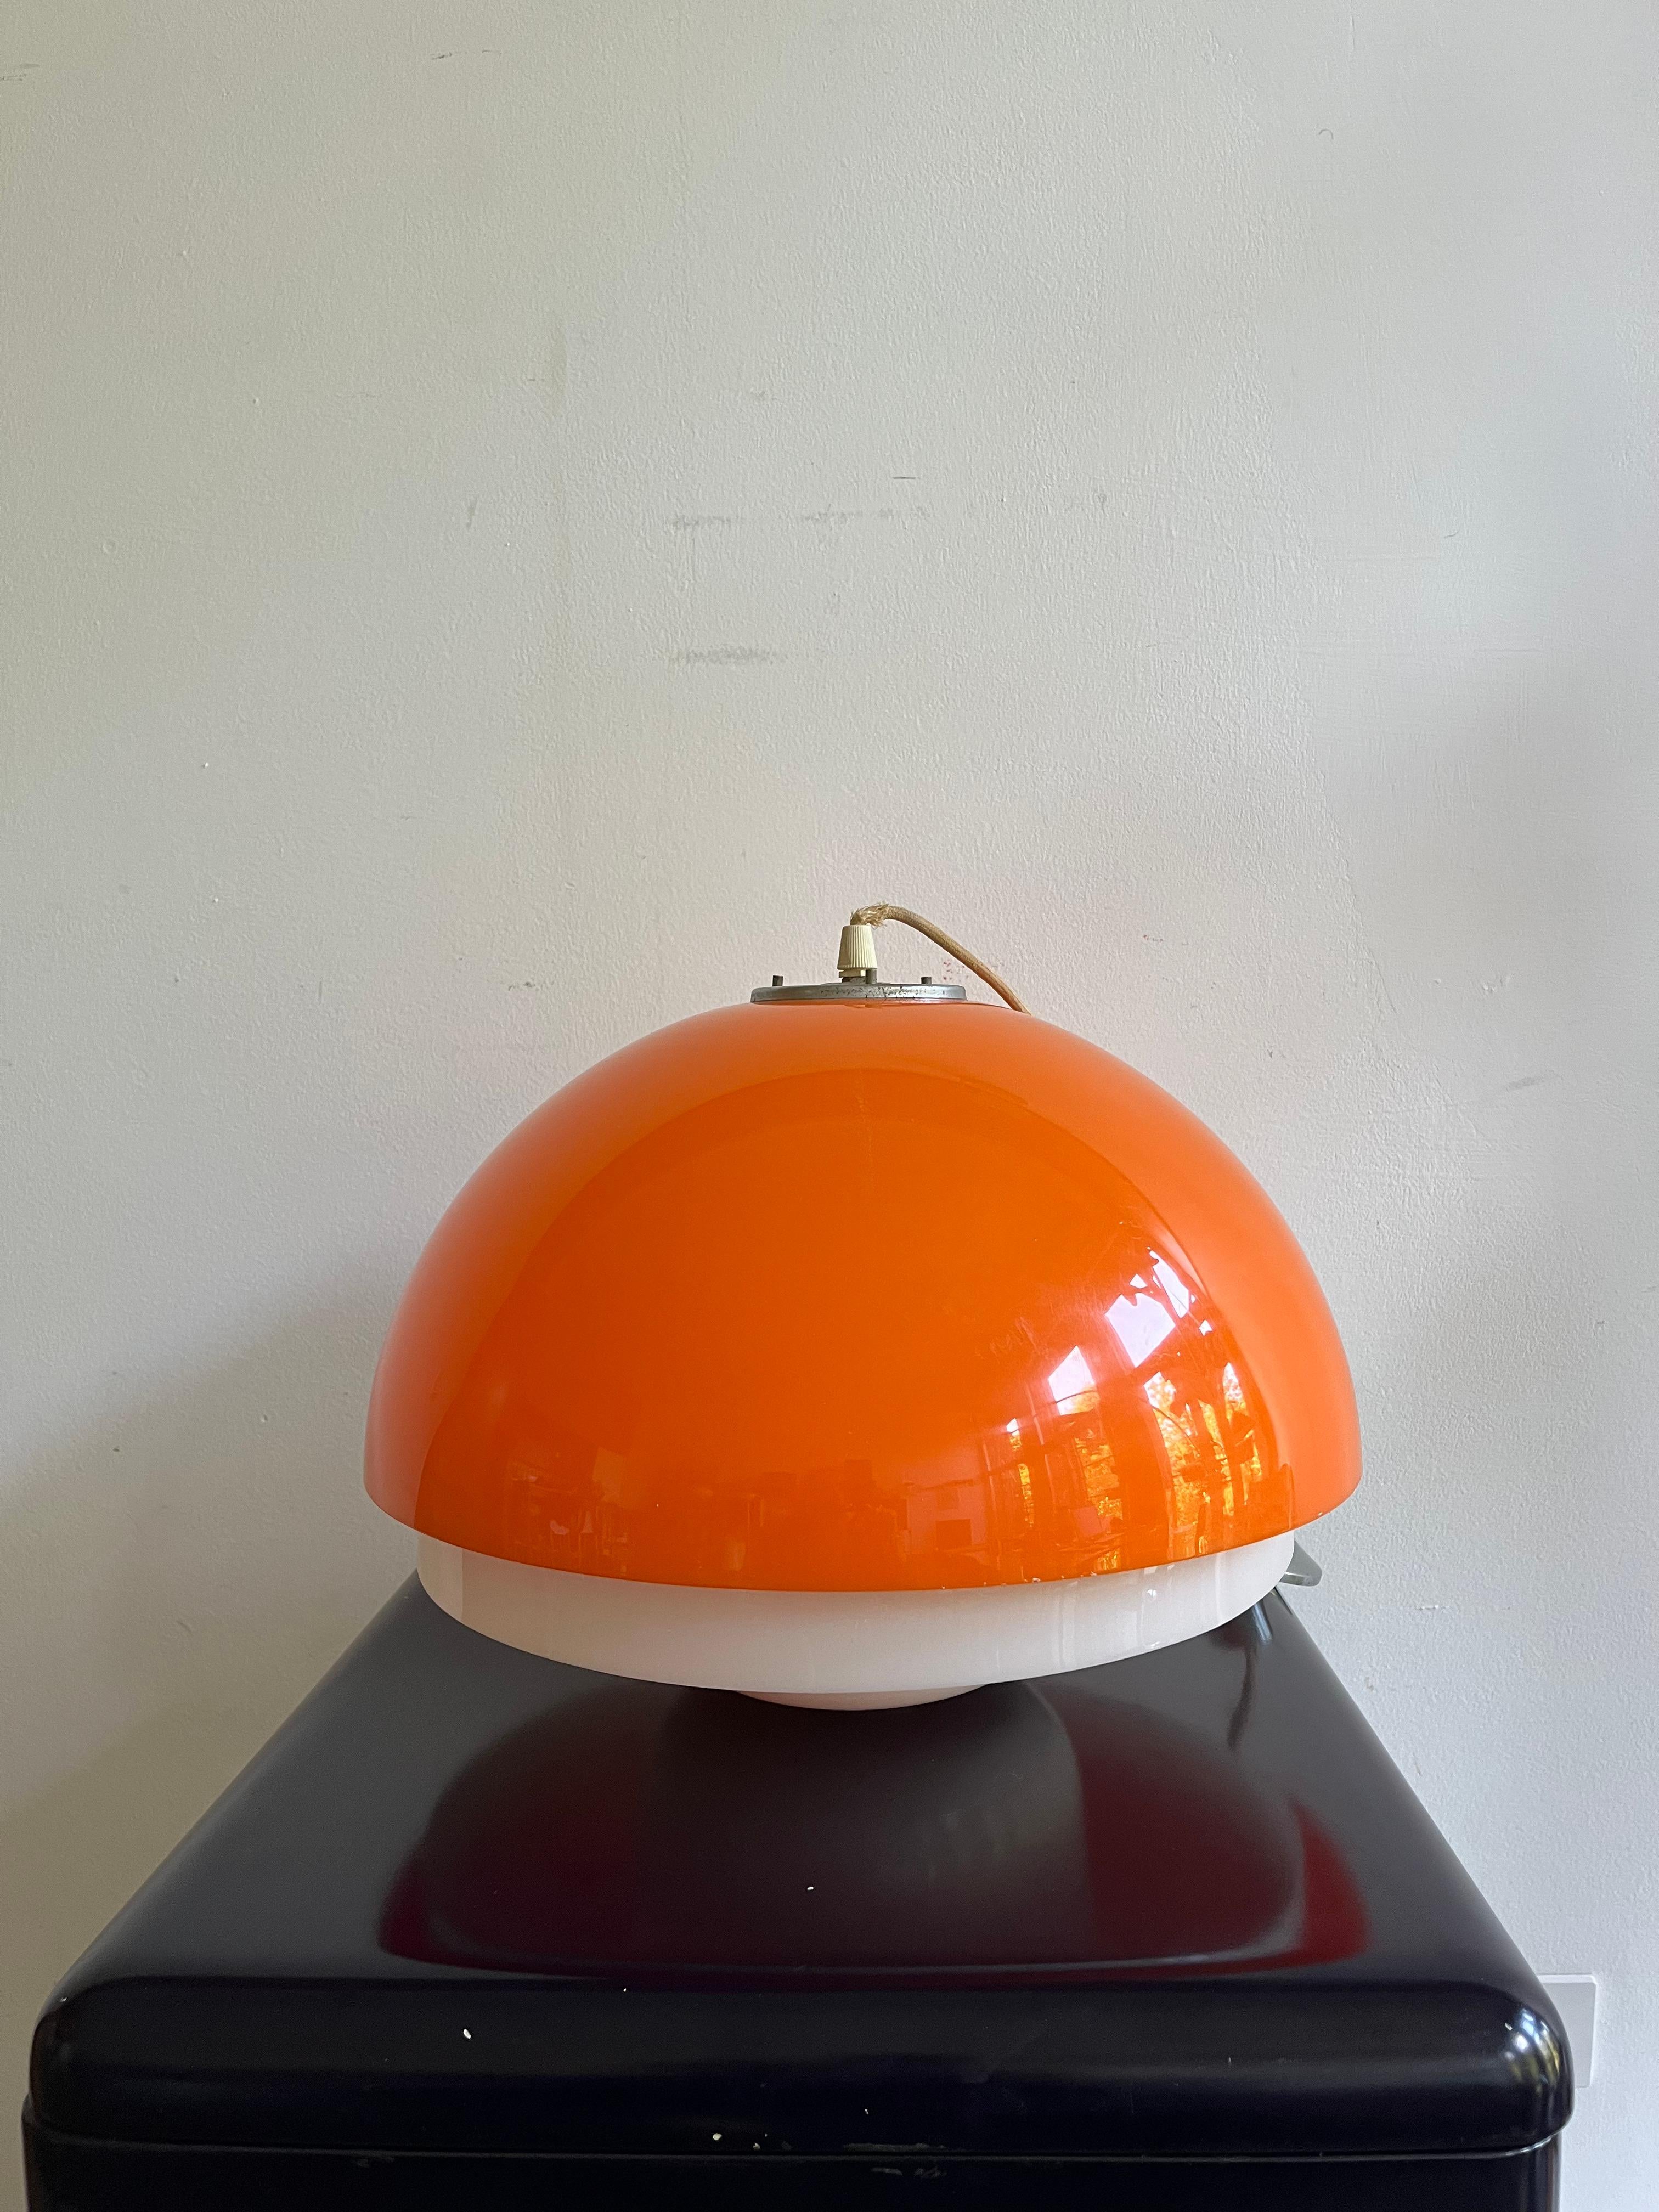 Plastic chandelier with orange and white double canopy. 

Overall good condition with minor signs of time.

